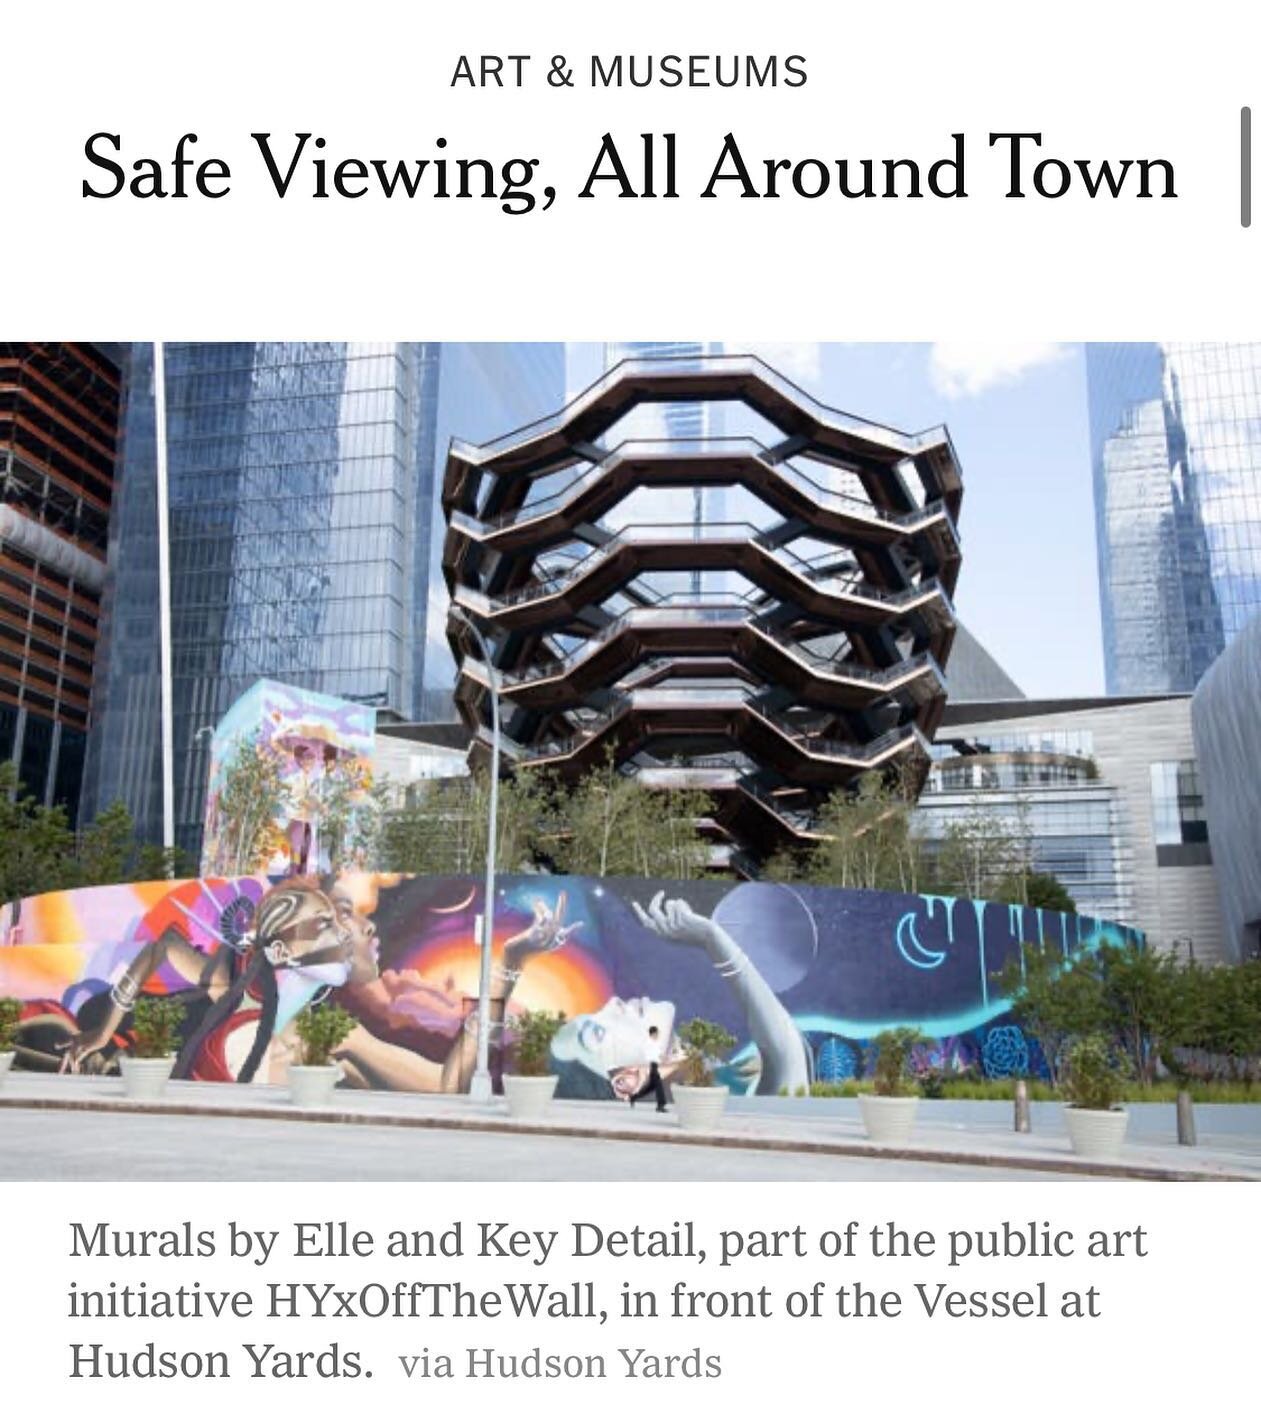 Featured in @nytimes today for &ldquo;Things to do this weekend.&rdquo; Check out the #artwork @thevesselnyc if you haven&rsquo;t seen it already! ☺️alongside the #bowerywall 🙌@jessicagoldmansrebnick 
&bull;
&bull;
&bull;
&bull;
&bull;#nytimes #elle